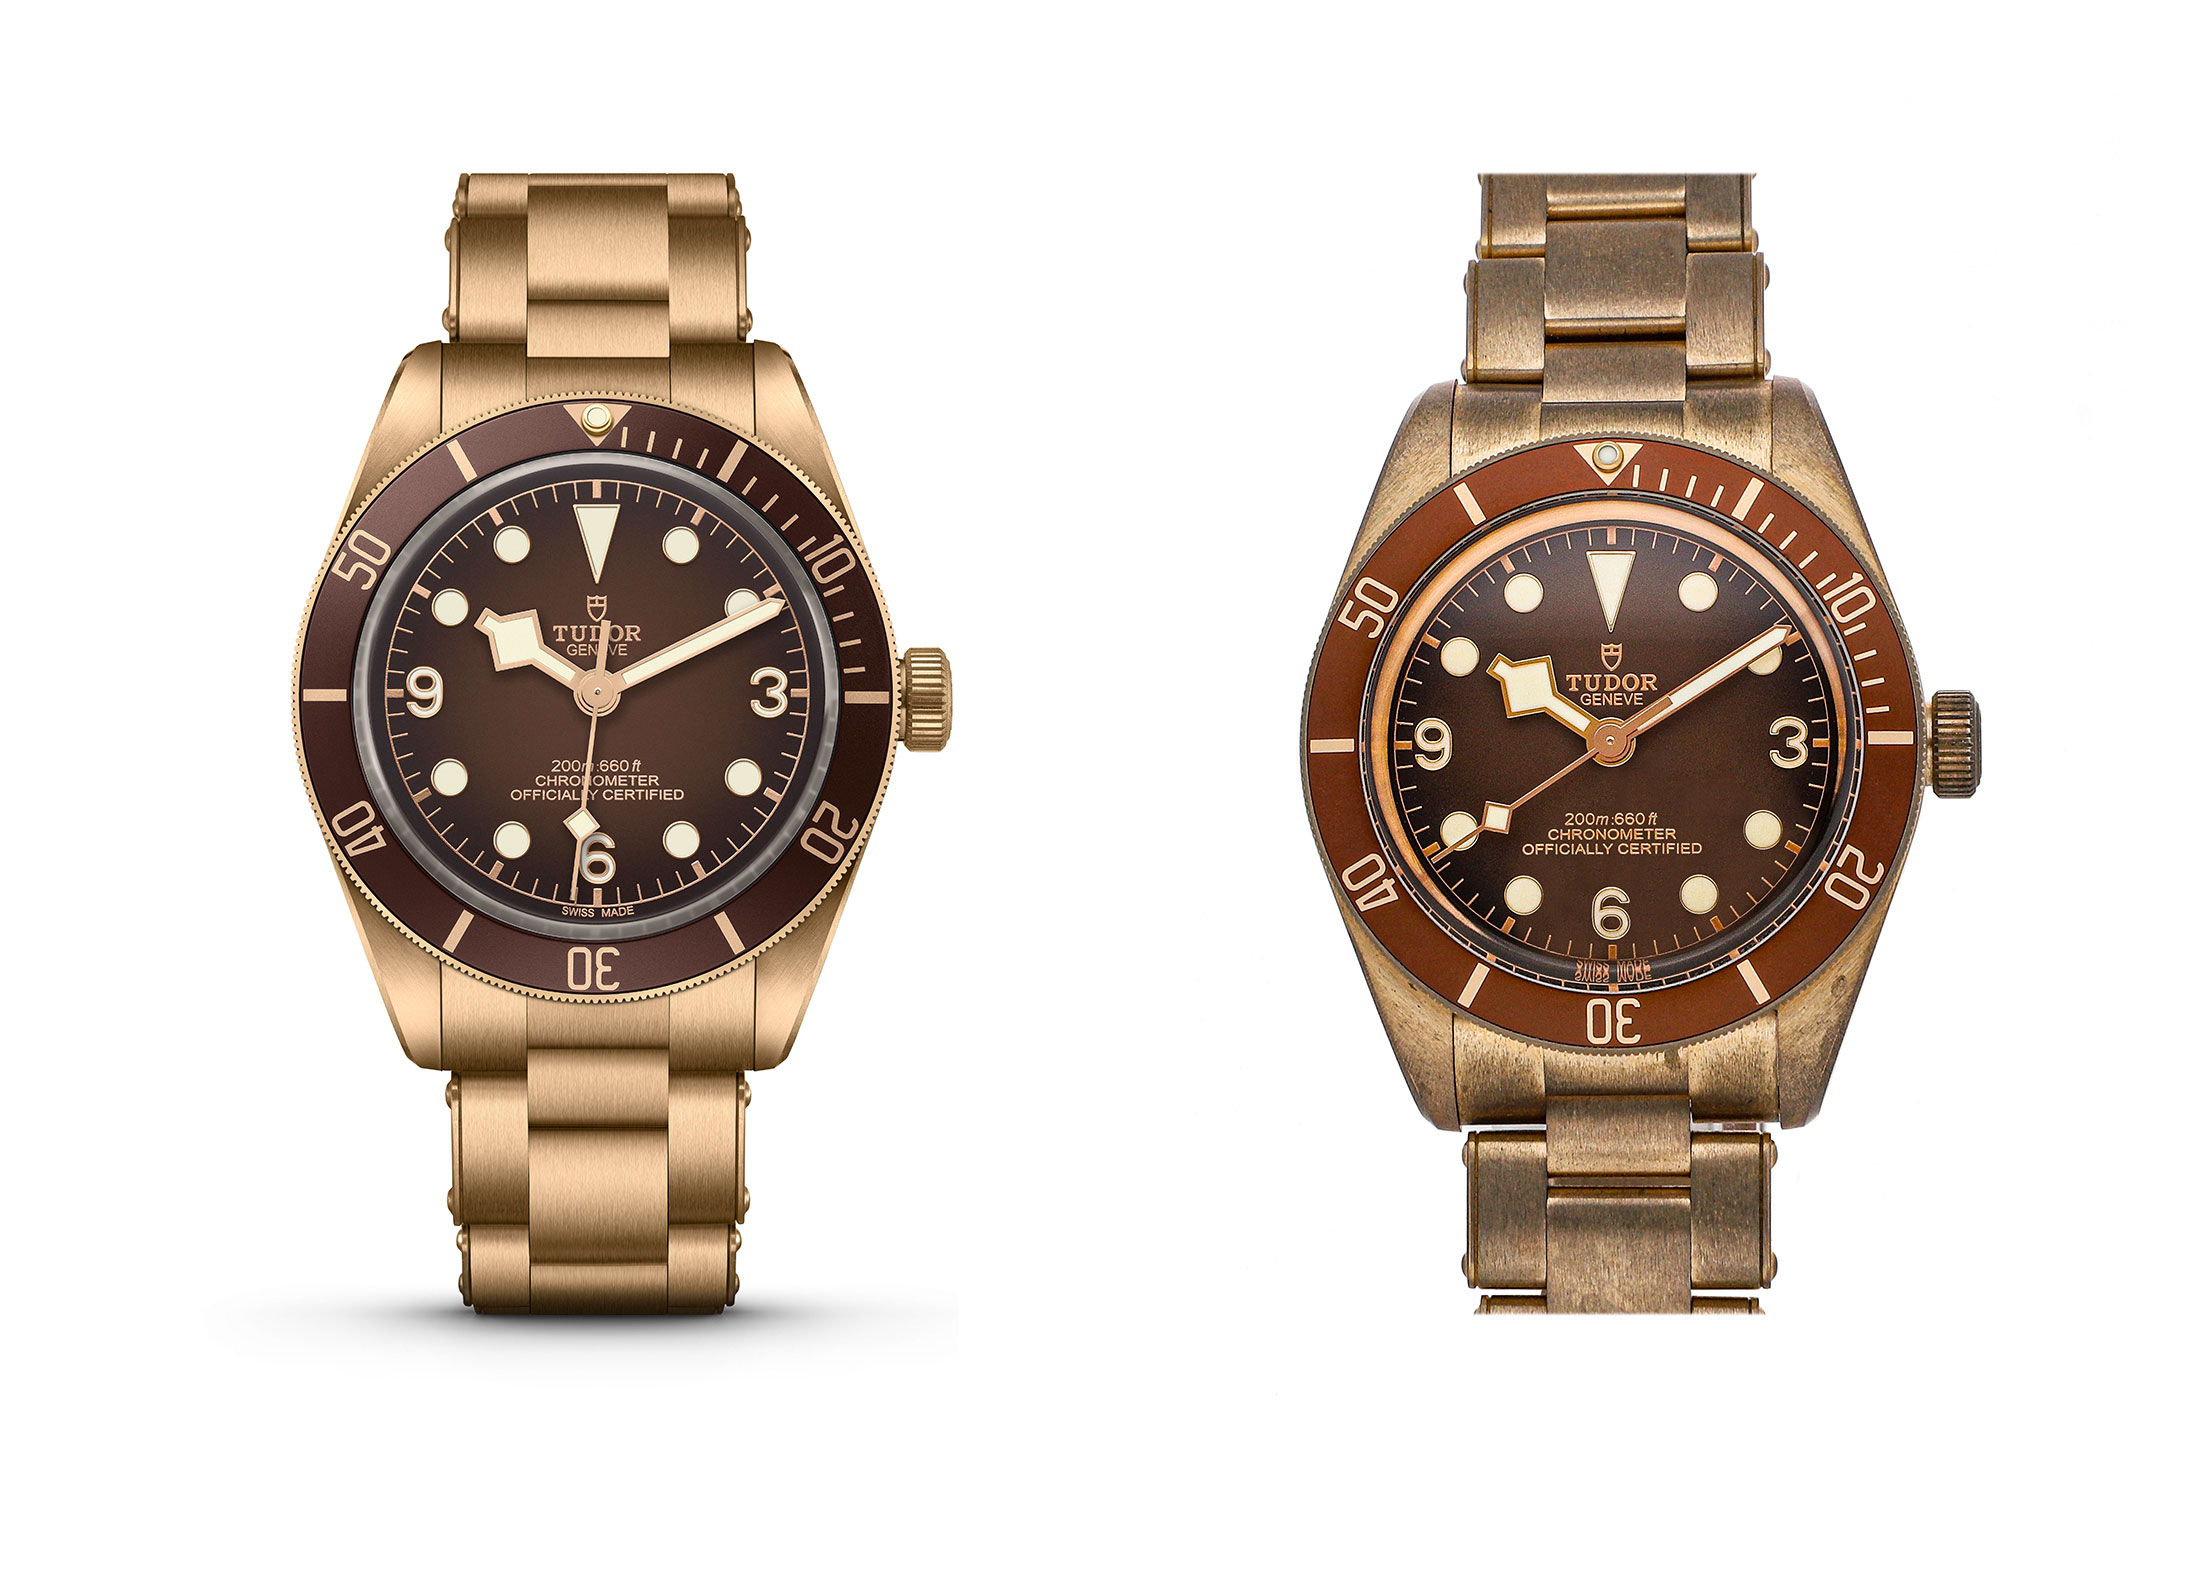 relates to Bronze Watches Quickly Lose Their Luster. That’s Why People Like Them